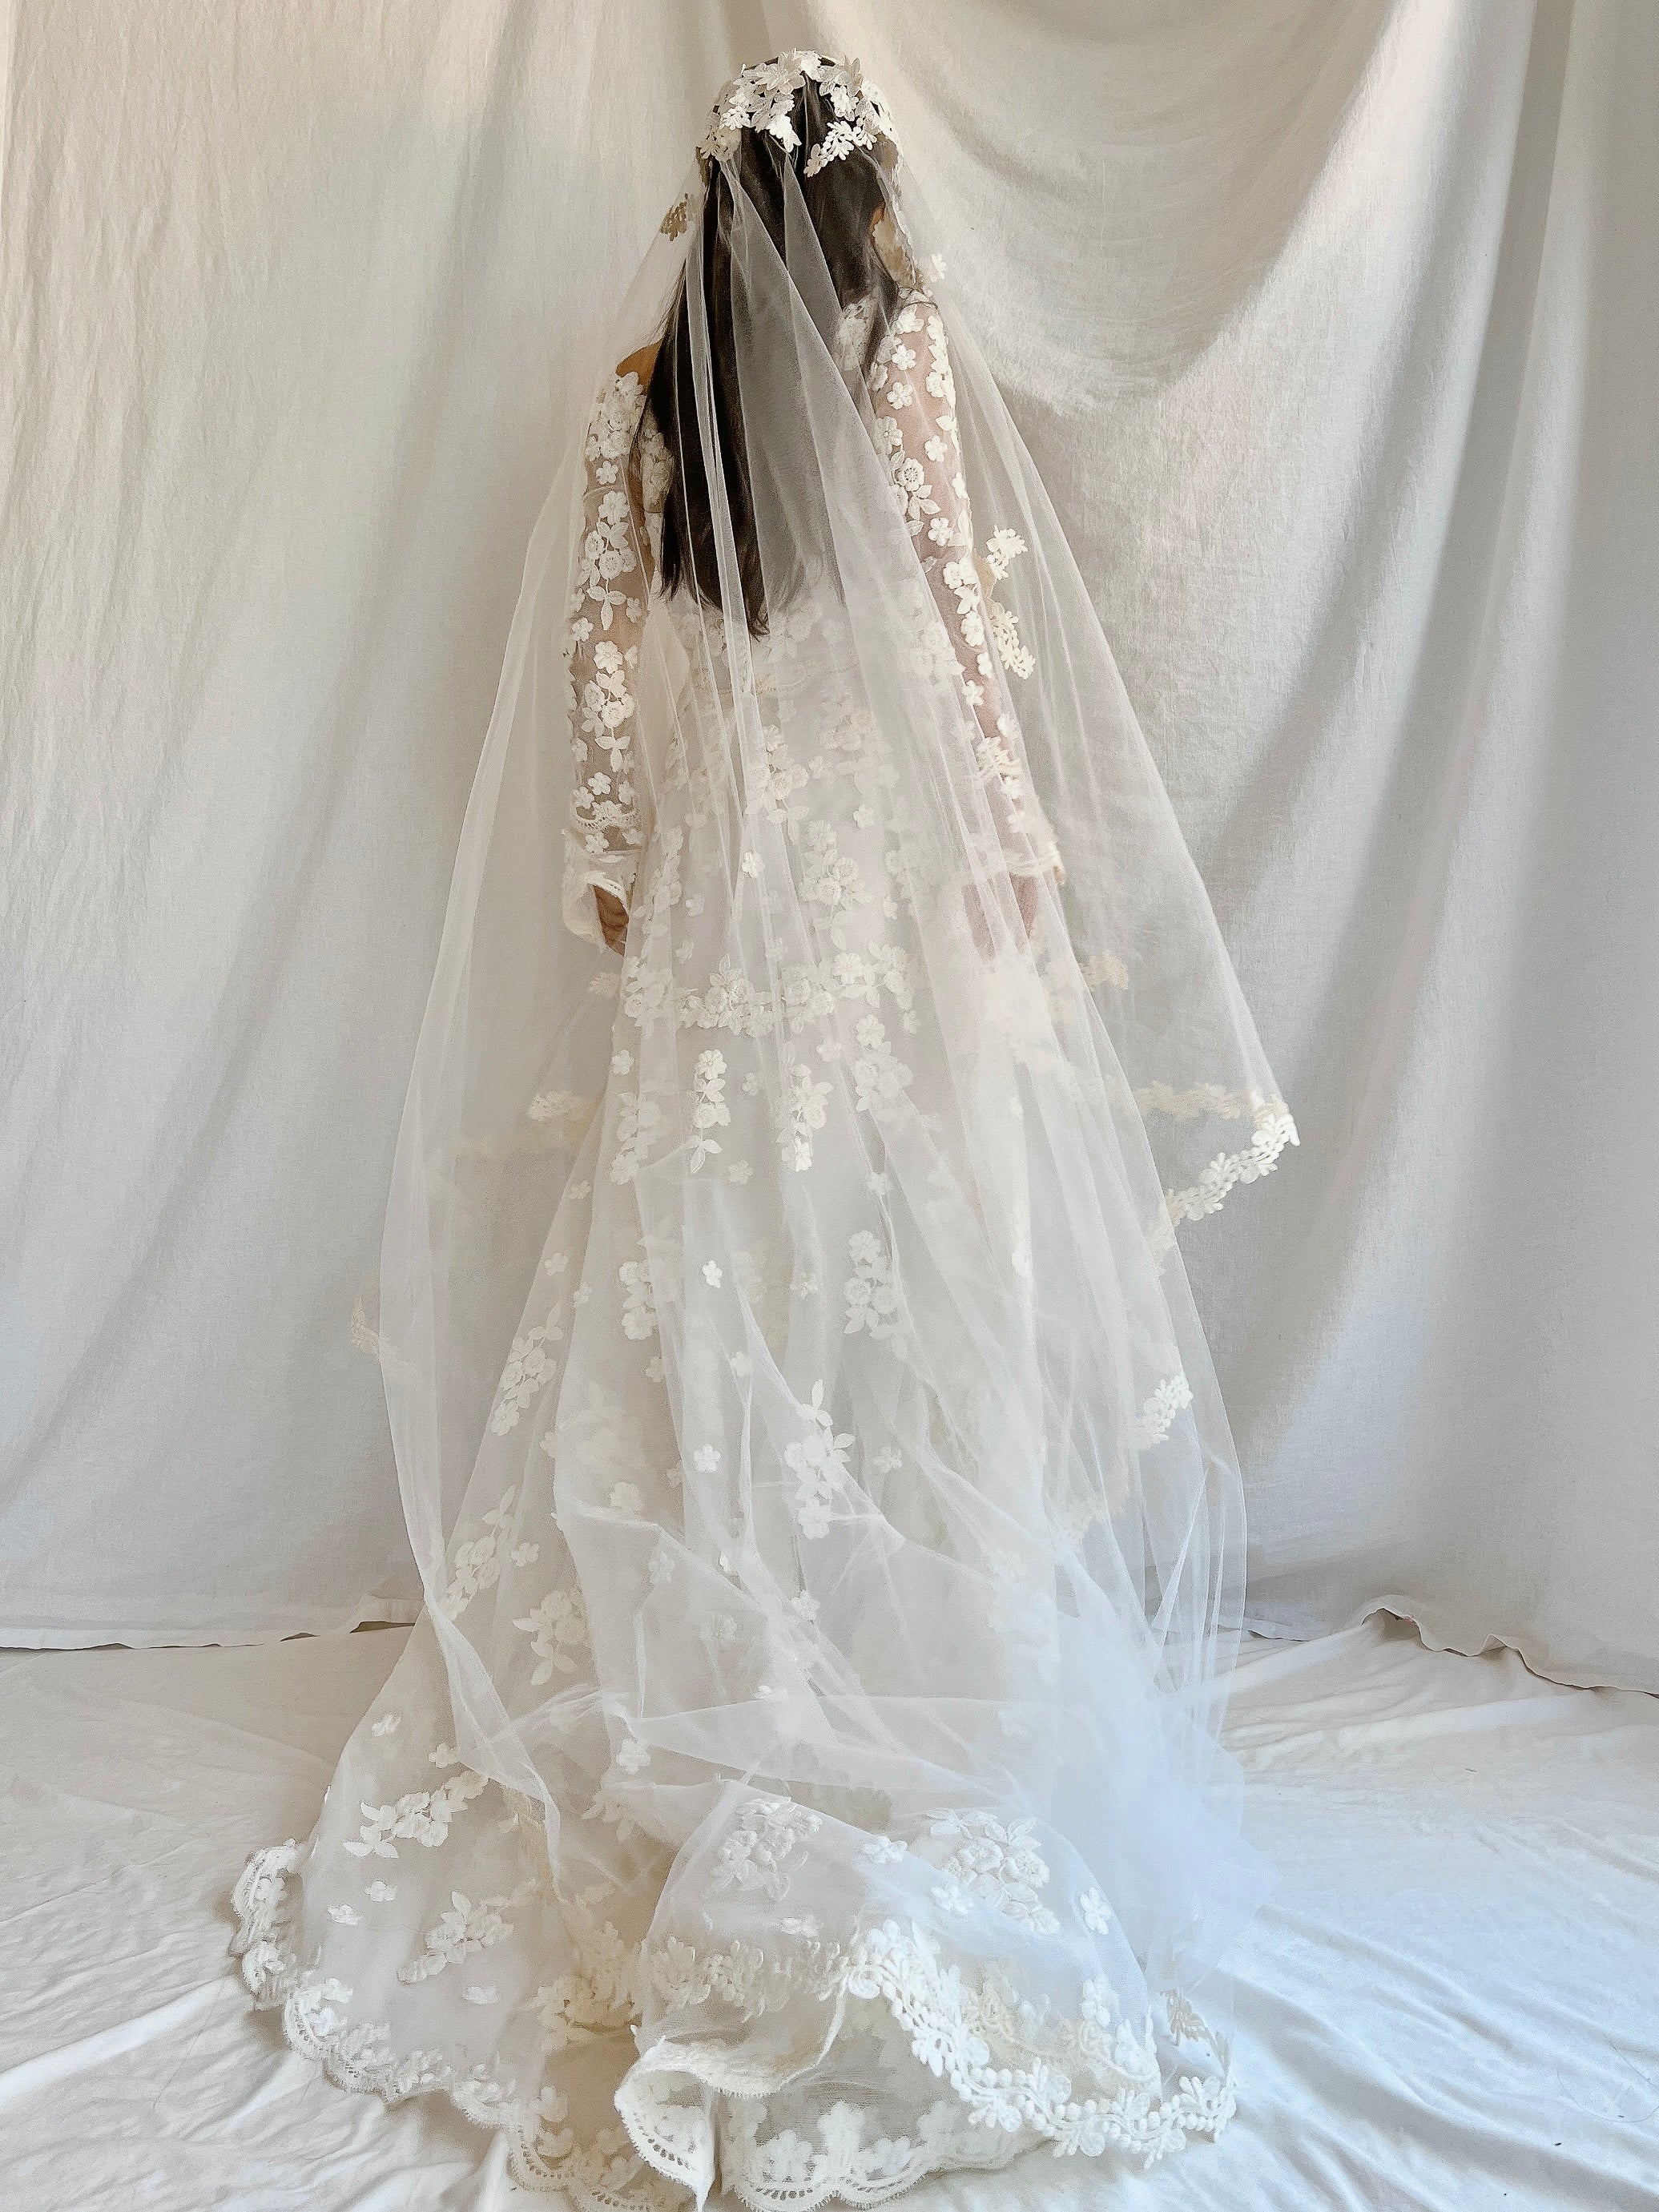 1960s Long Sleeves Floral Appliqué Gown with Veil - S